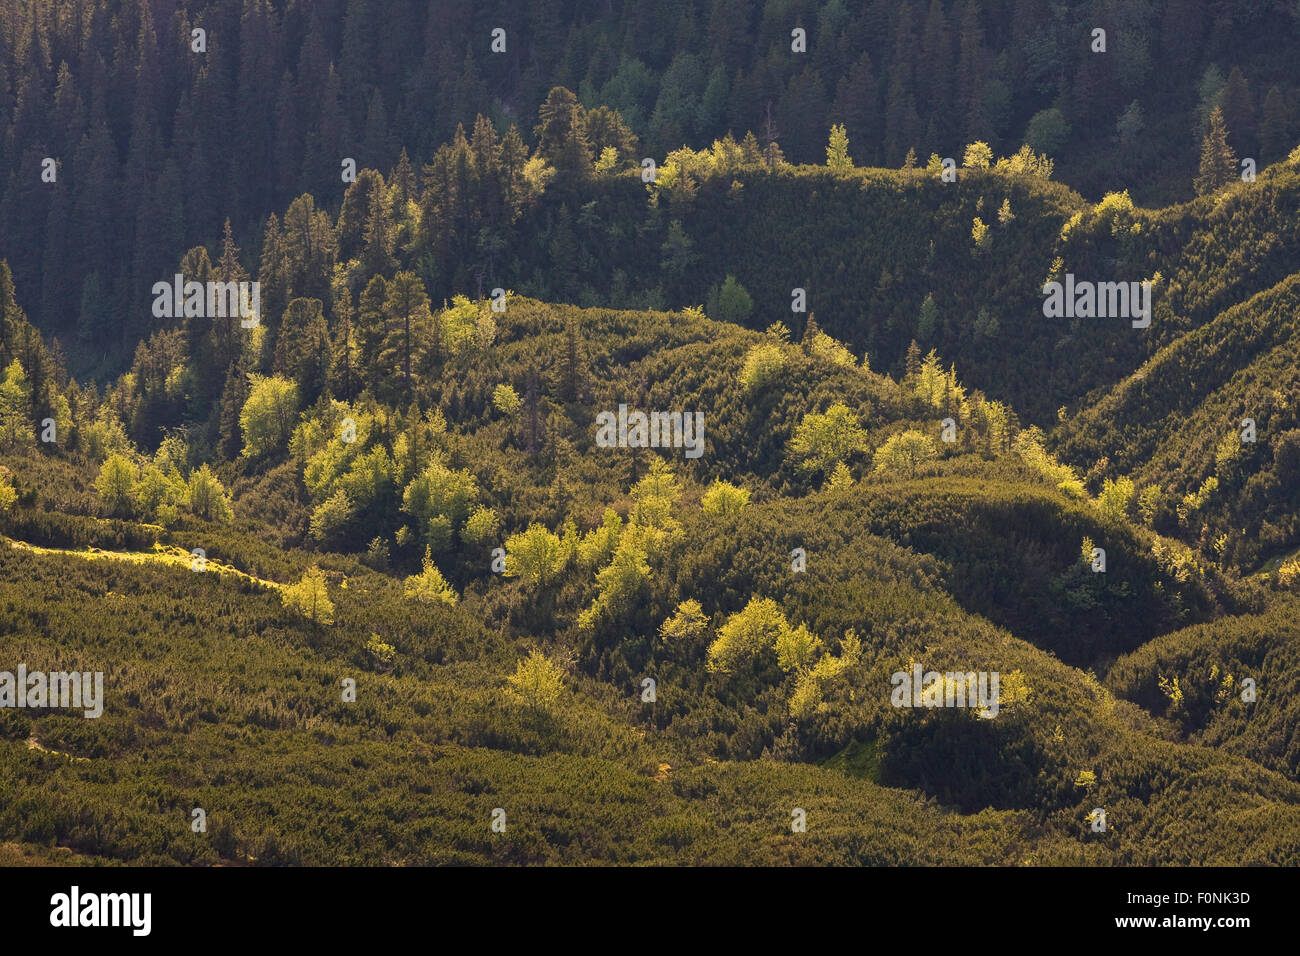 Border between mountain forest with Norway spruce (Picea abies) Mountain ash / Rowan (Sorbus aucuparia) and Arolla pine (Pinus cembra) trees and the Dwarf mountain pine (Pinus mugo) zone, Western Tatras, Carpathian Mountains, Slovakia, June 2009 Stock Photo